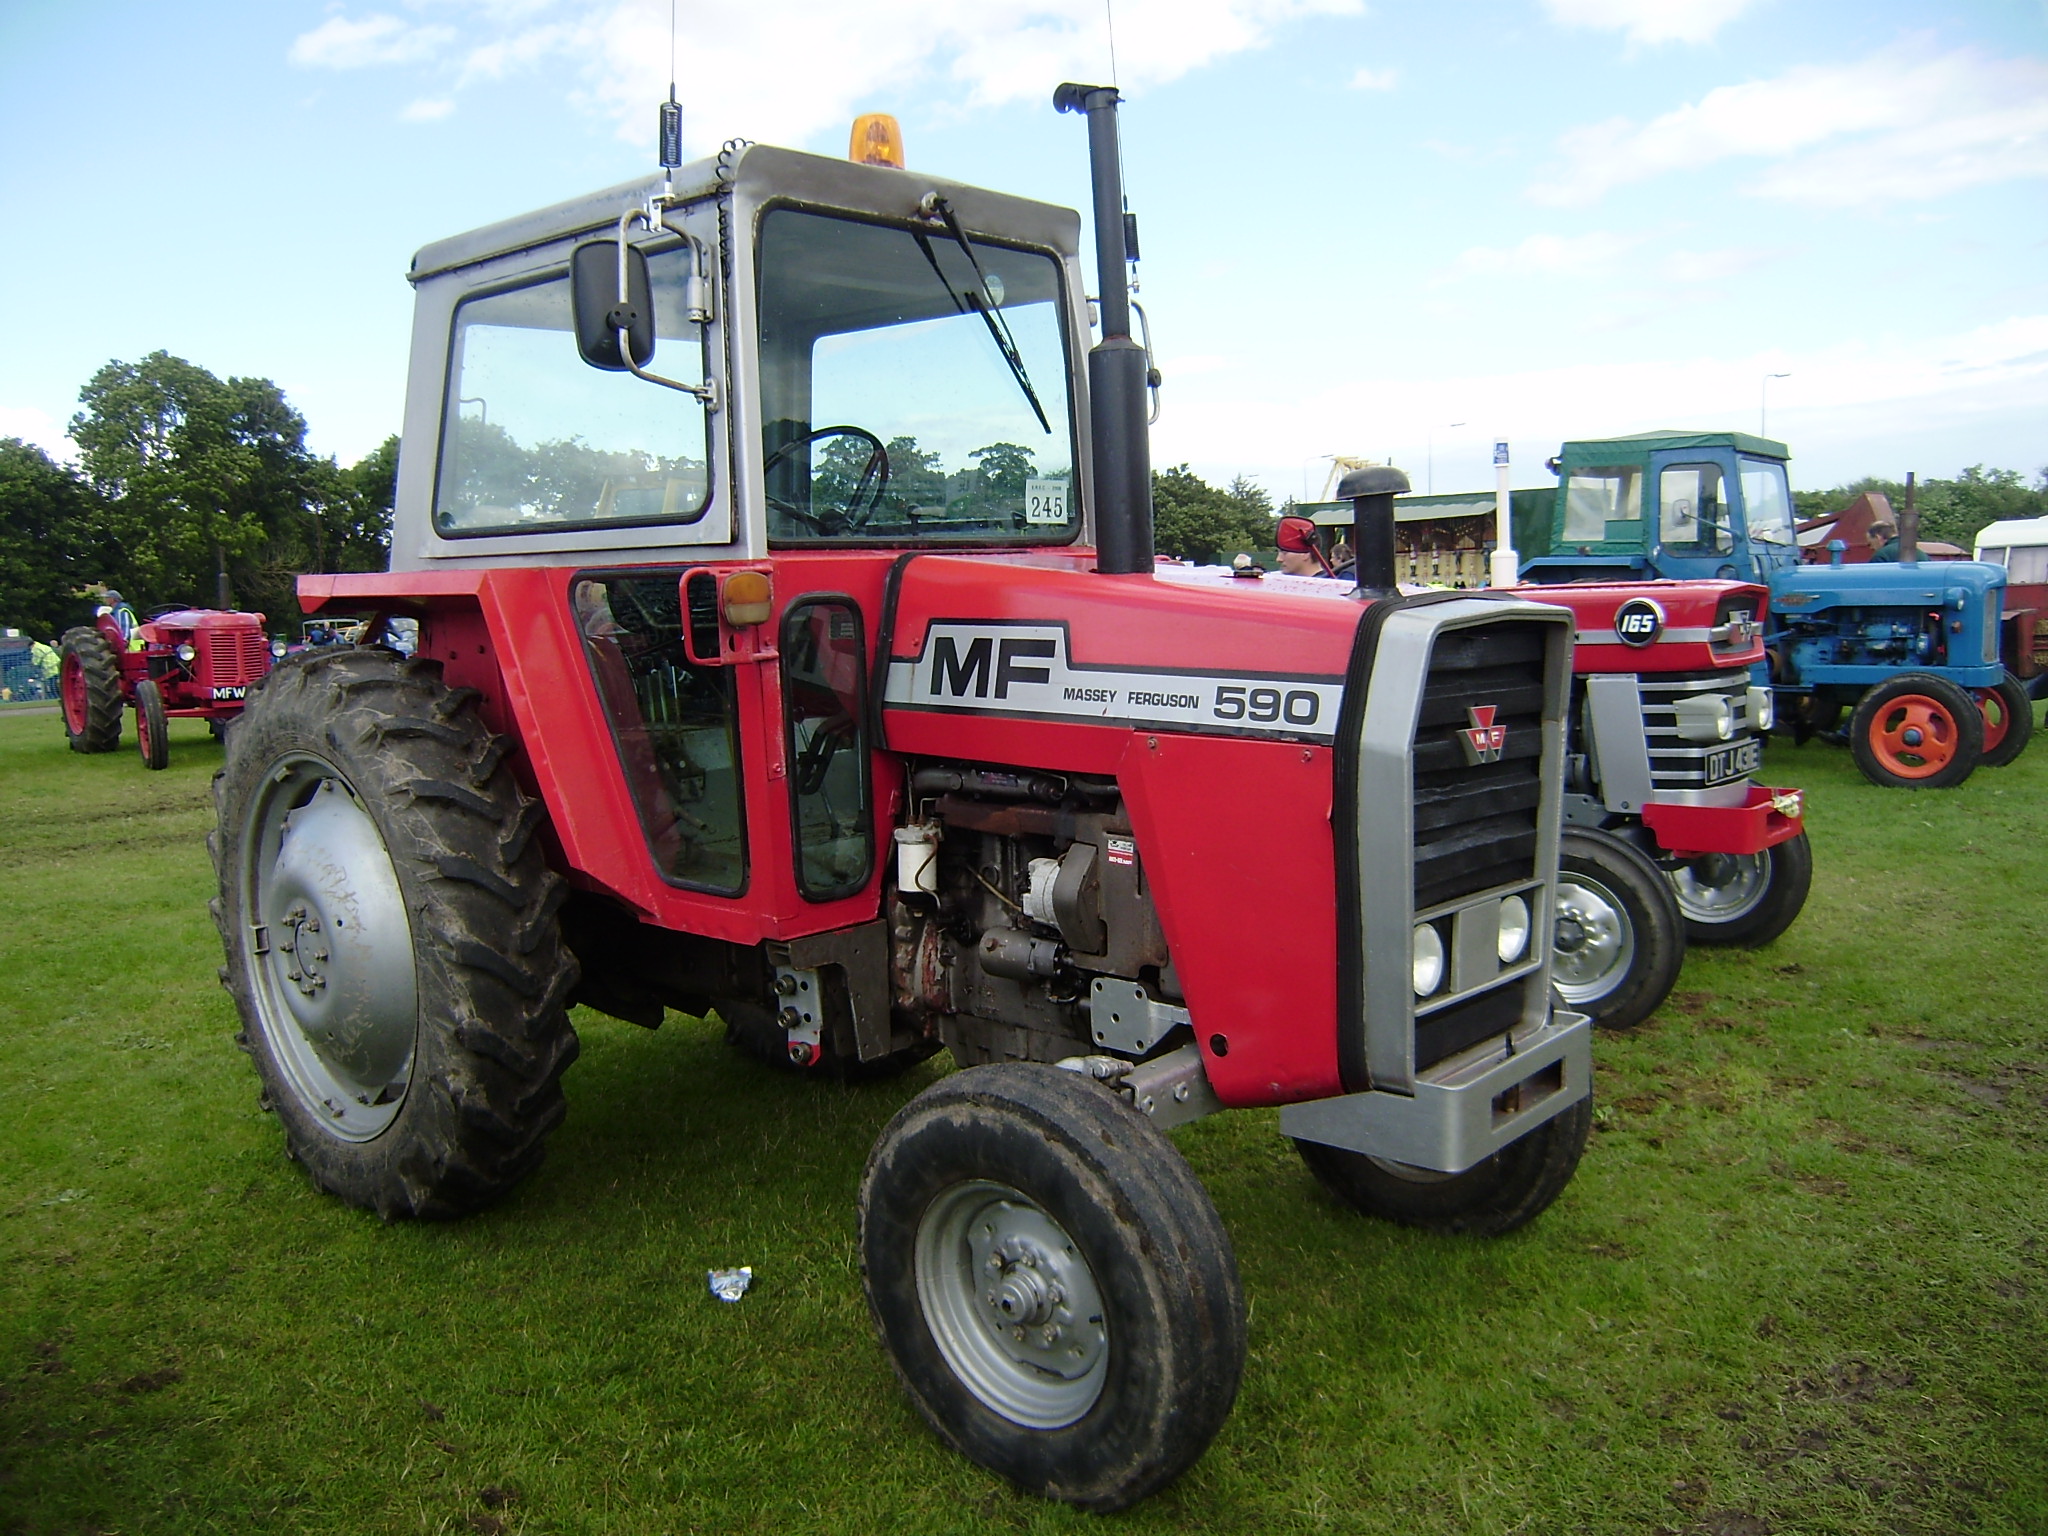 Massey Ferguson Tractor And Construction Plant Wiki The Classic Vehicle And Machinery Wiki 4521